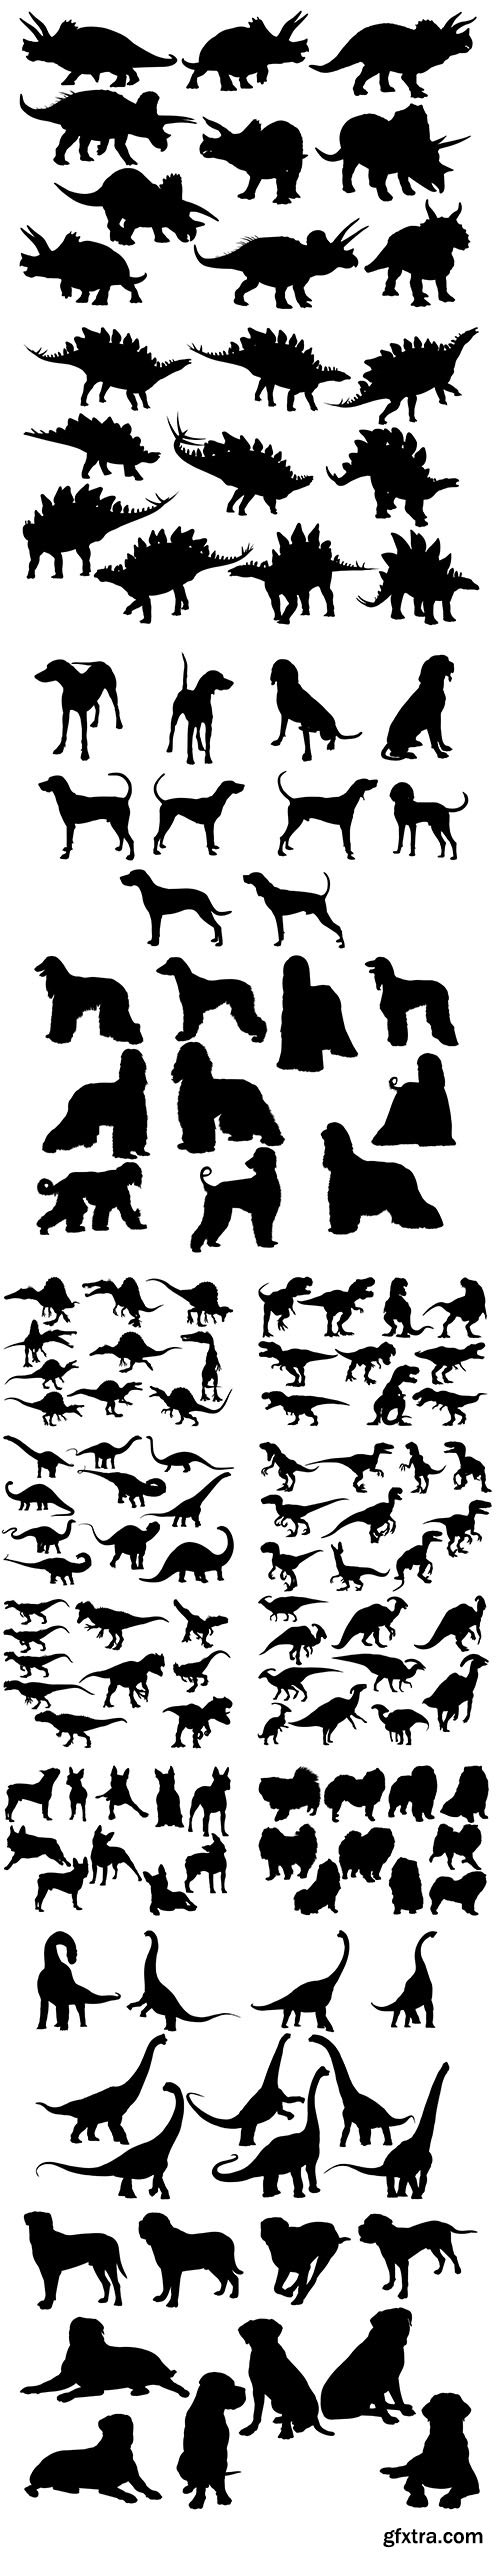 Dinosaur and Dog Silhouette Collection